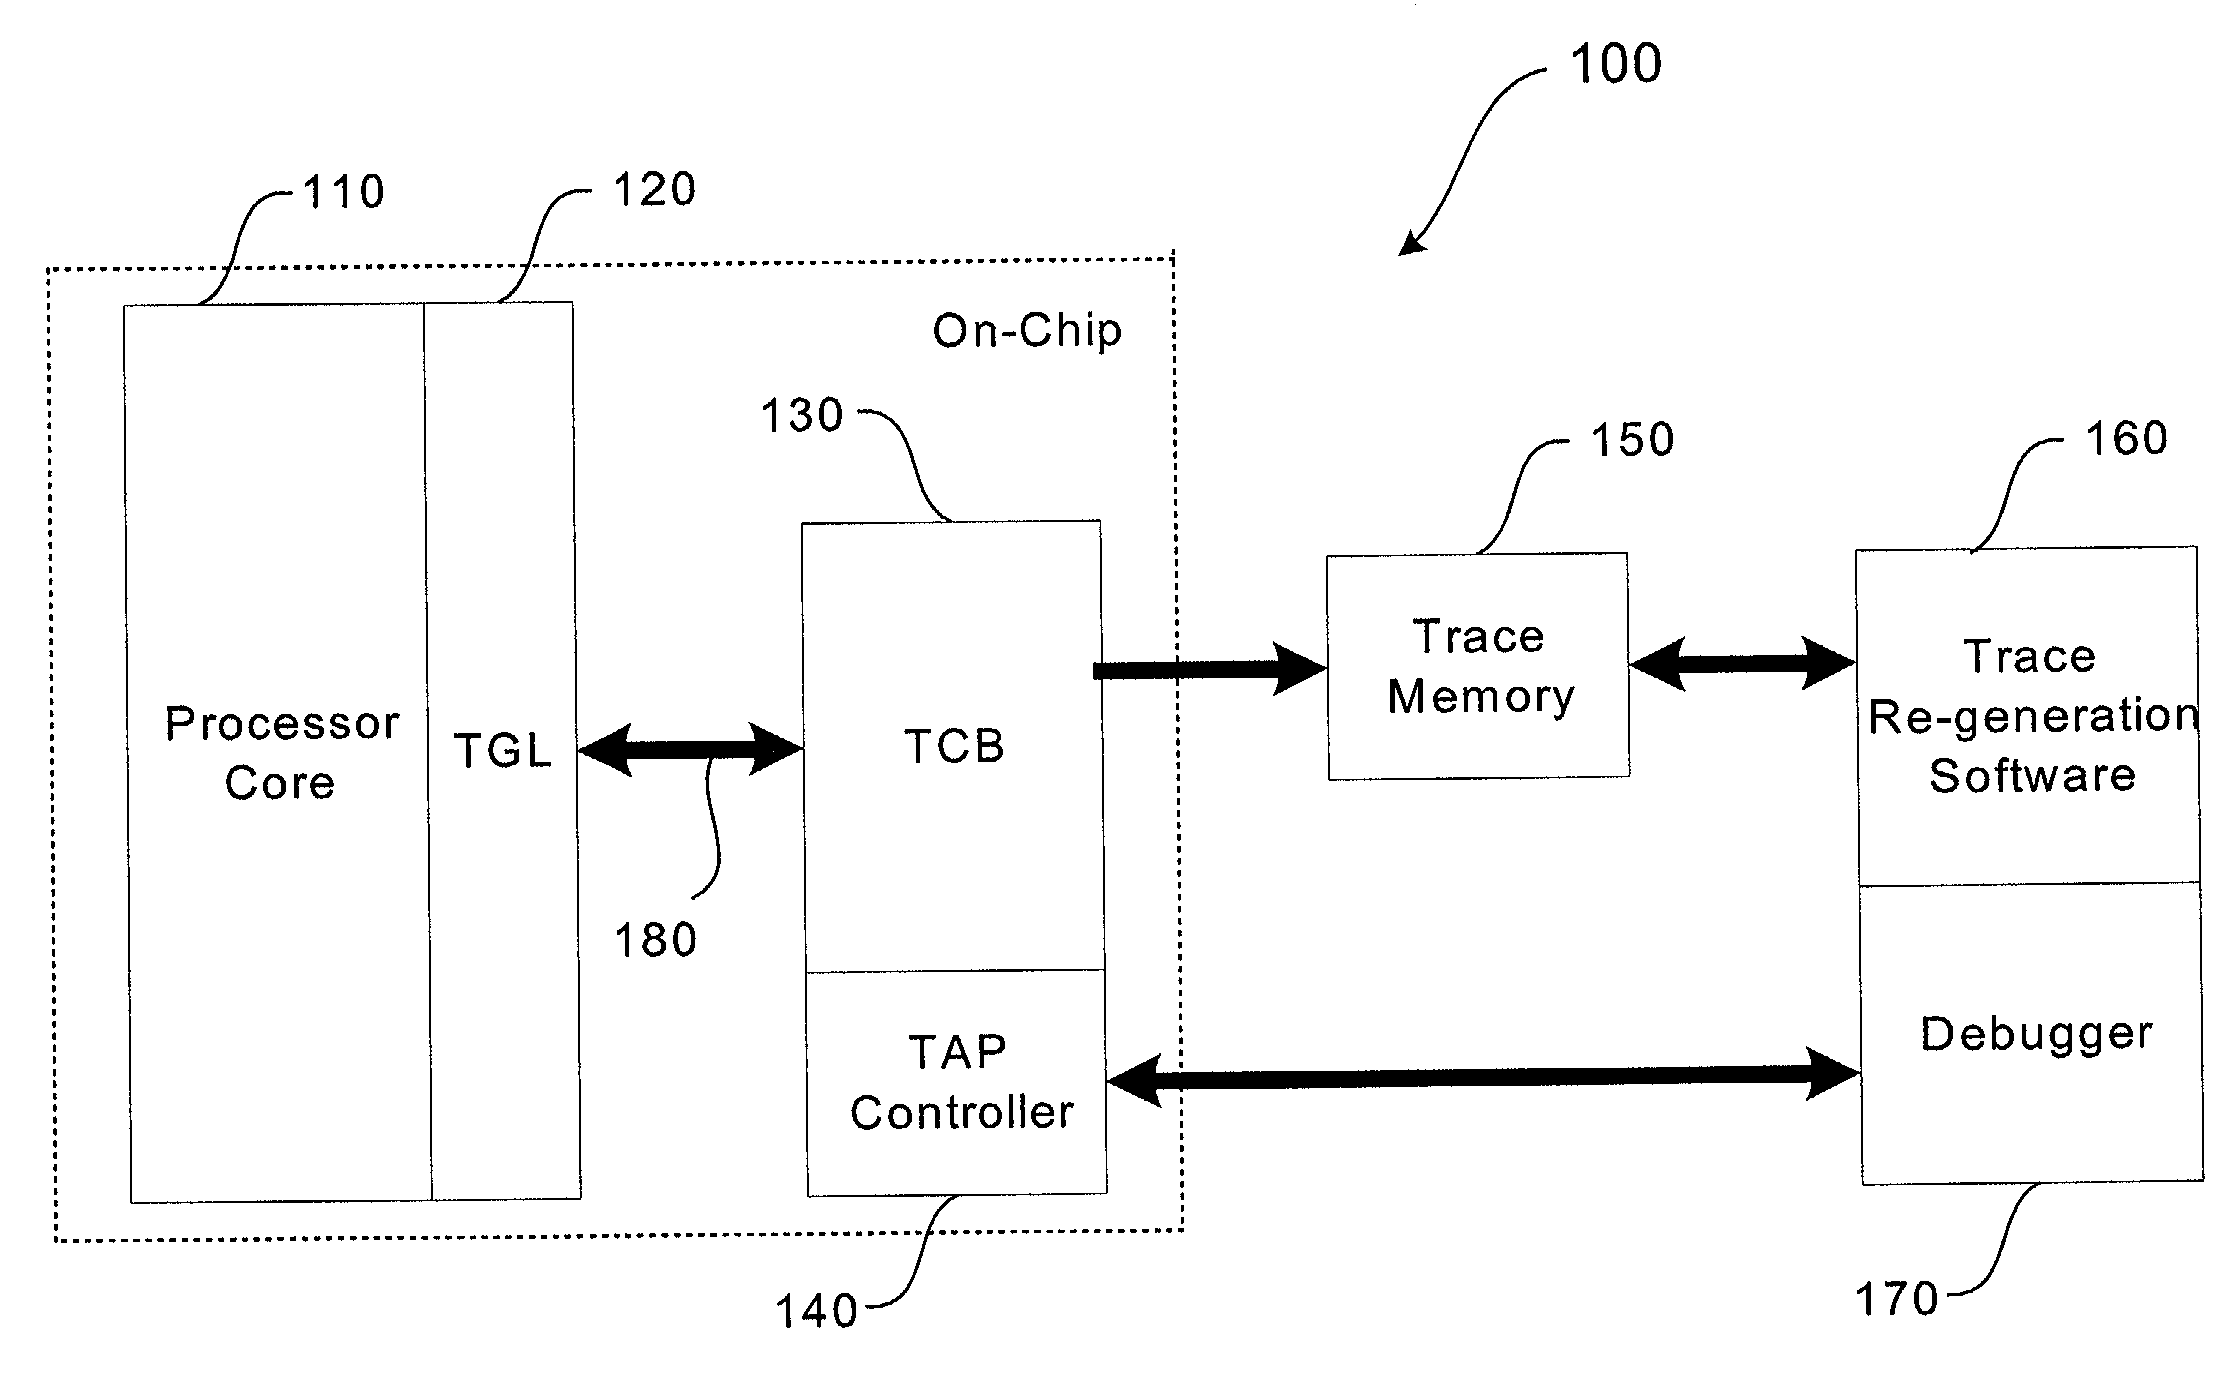 Trace control based on a characteristic of a processor's operating state